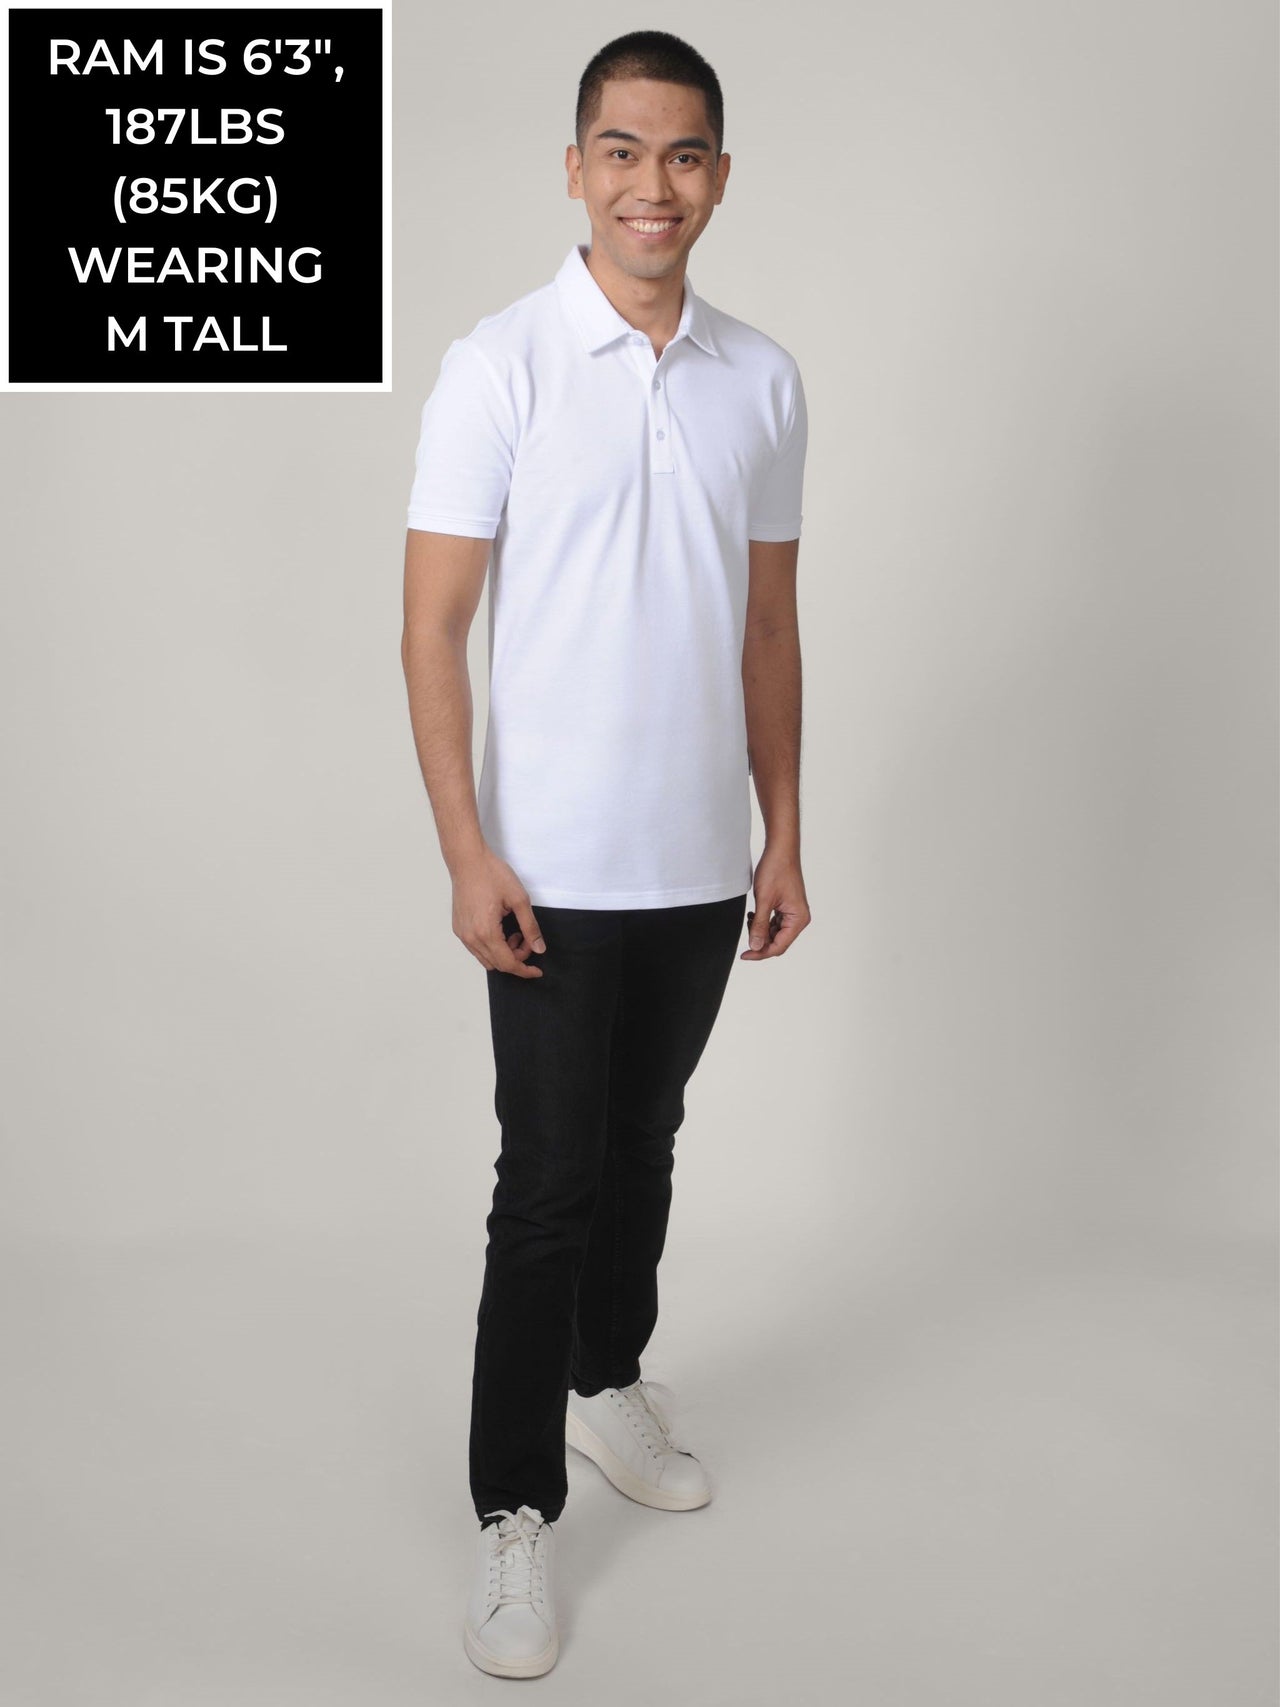 A head to toe shot of a tall skinny guy wearing a white tall polo shirt.